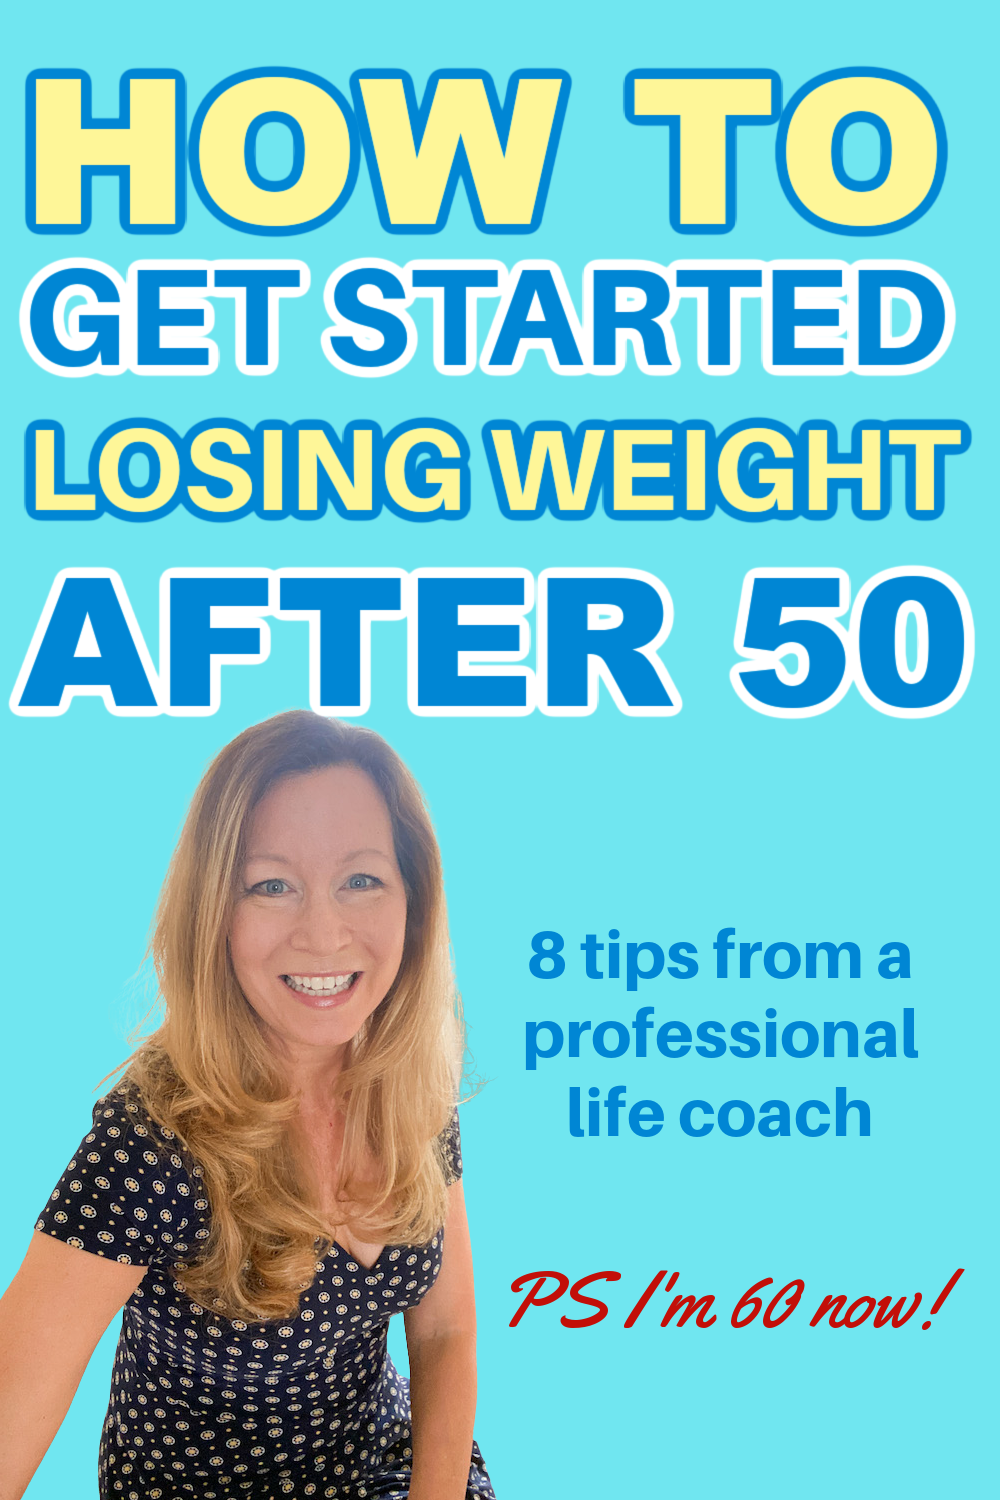 Picture of post author Sara with words: How to get started losing weight after 50